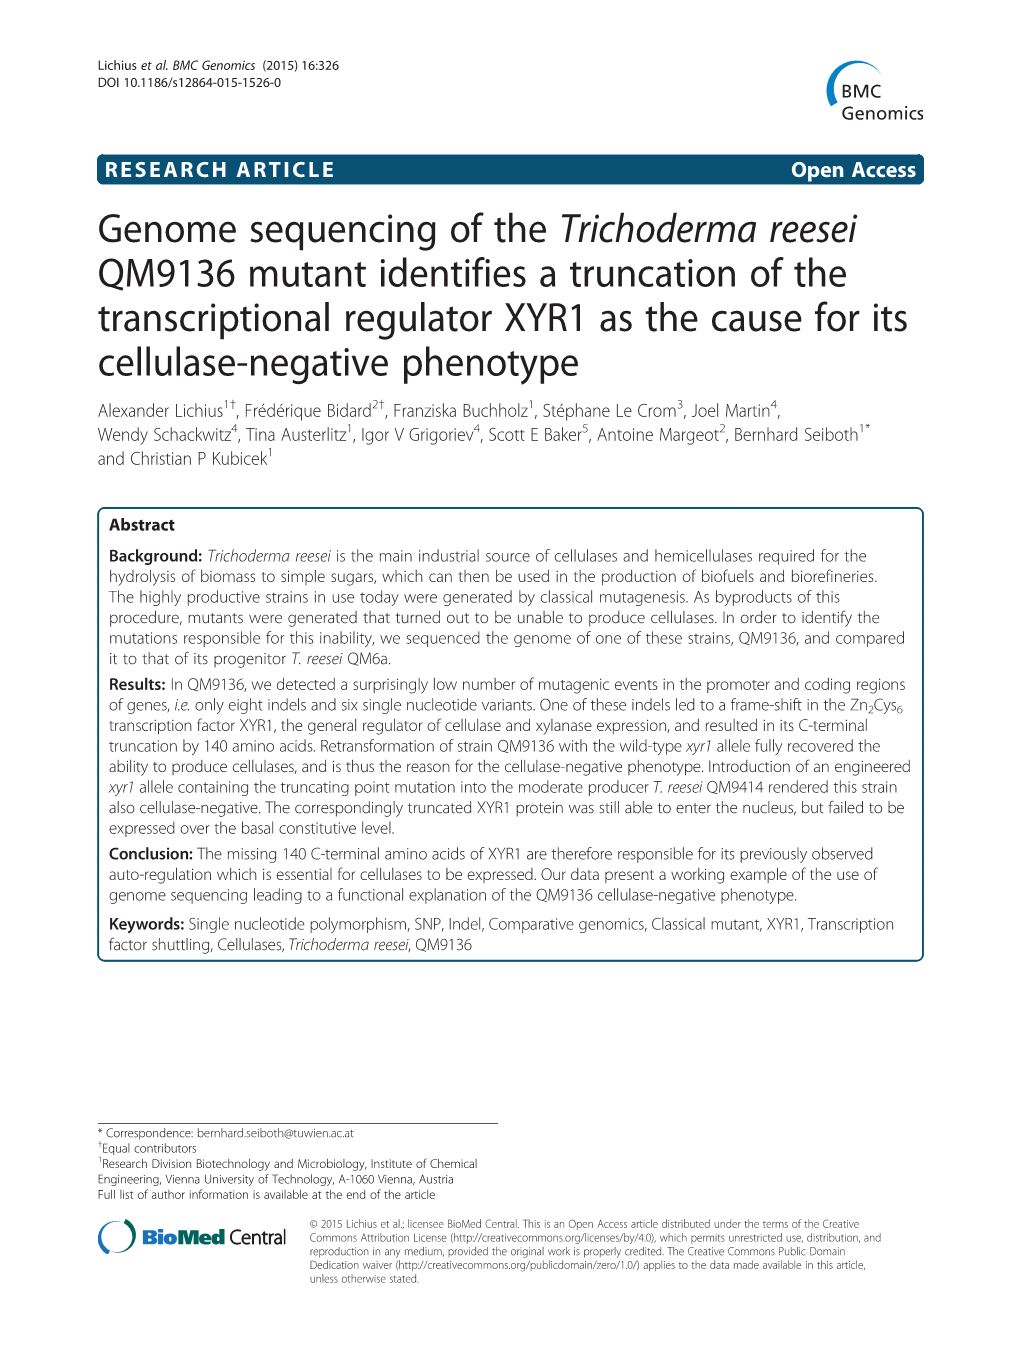 Genome Sequencing of the Trichoderma Reesei QM9136 Mutant Identifies a Truncation of the Transcriptional Regulator XYR1 As the C